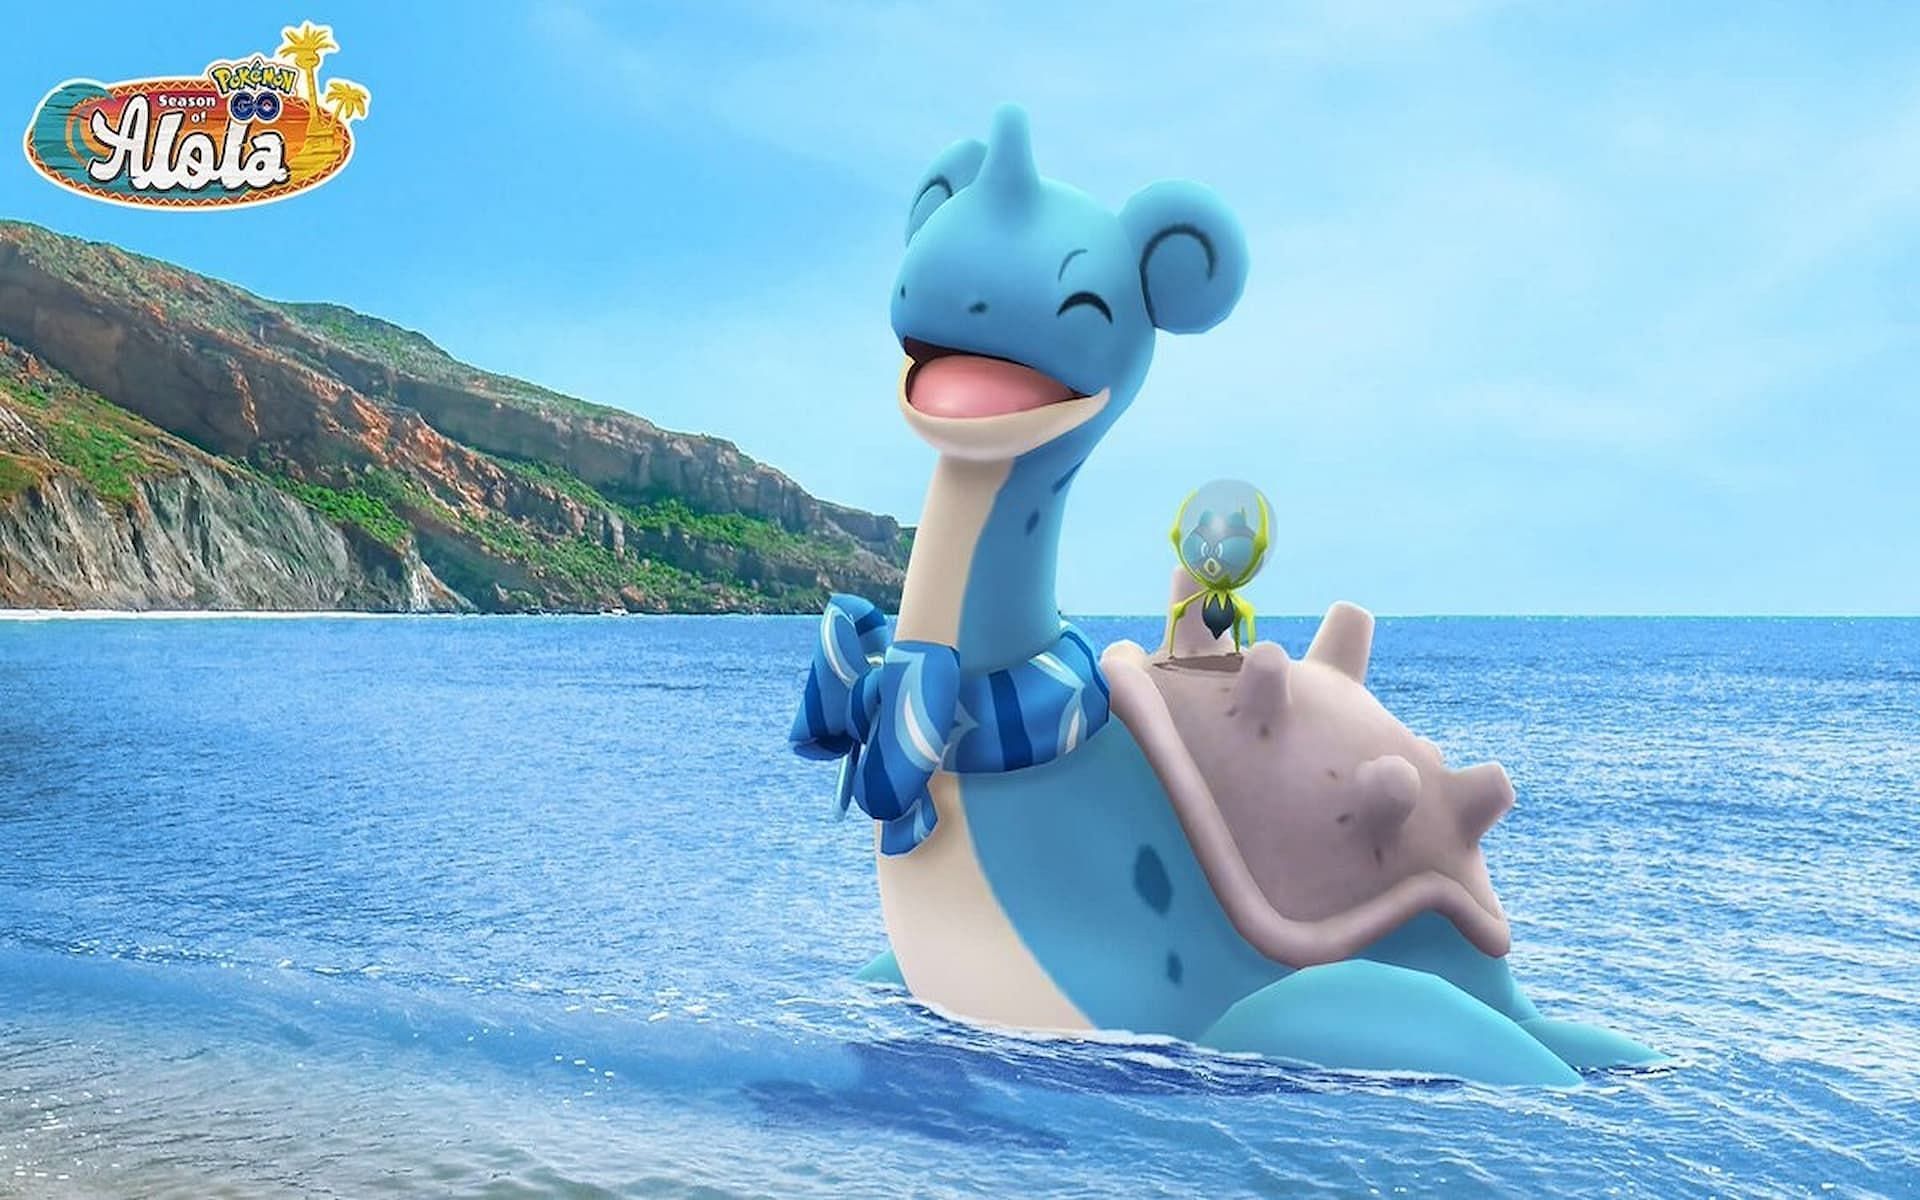 Can you catch a shiny Lapras wearing a scarf in Pokemon Go?